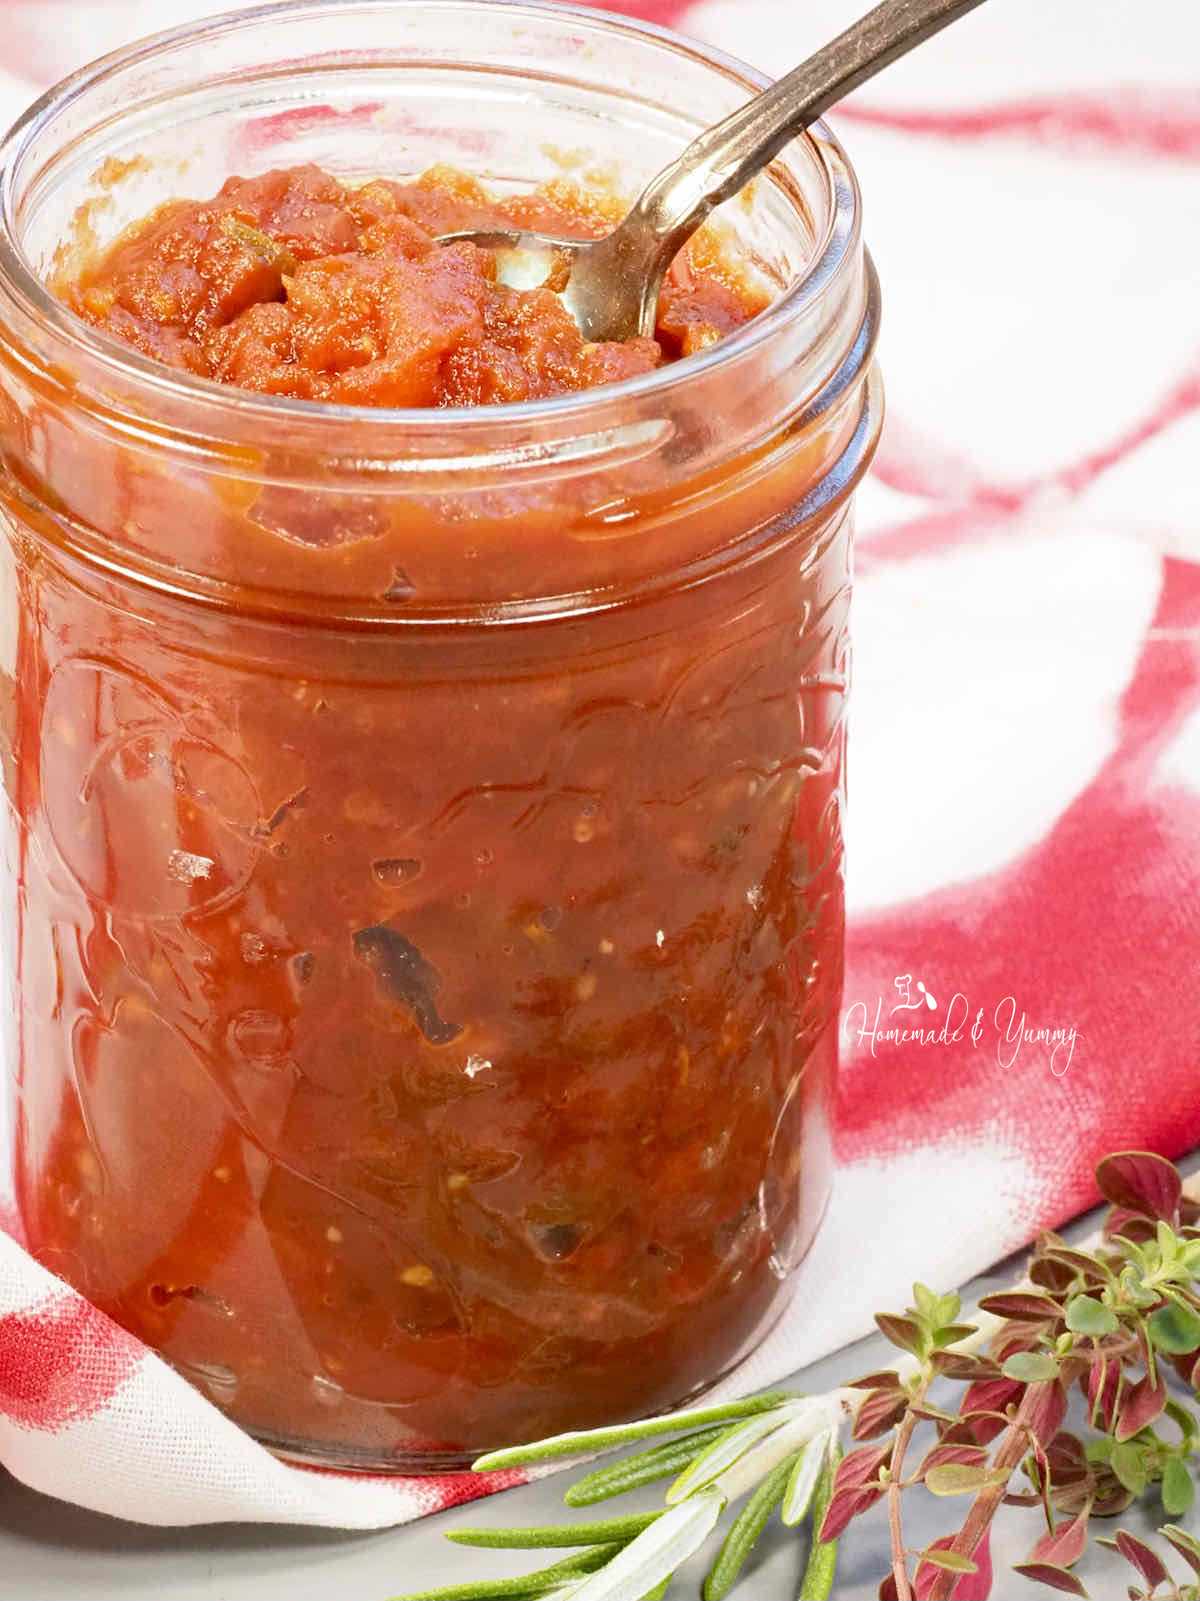 Savory Tomato Jam is rich, thick and easy to make.